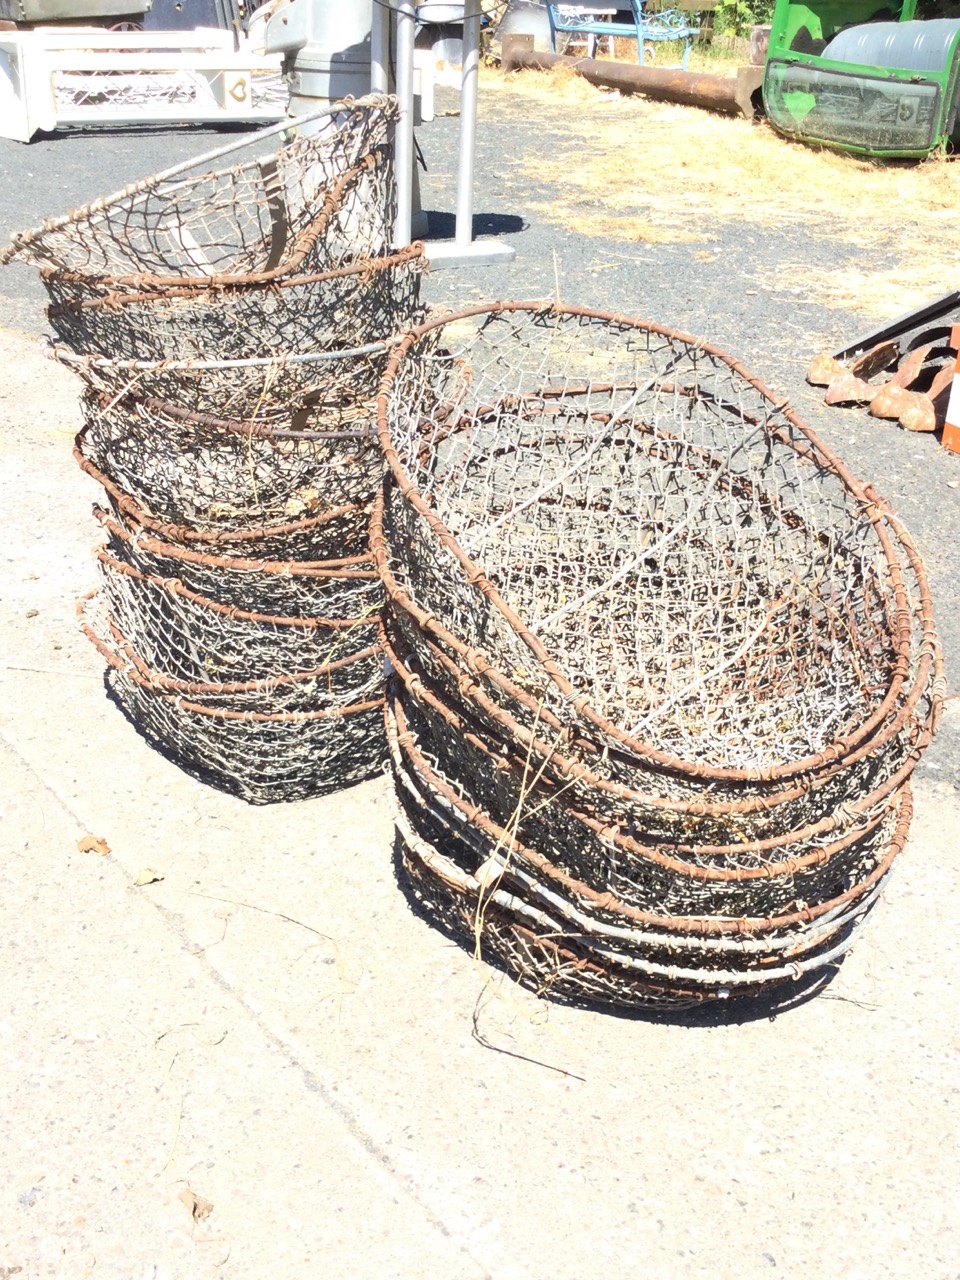 Twenty-two oval mesh potato cage baskets, each with hand-hole apertures to side rims. (22) - Image 3 of 3